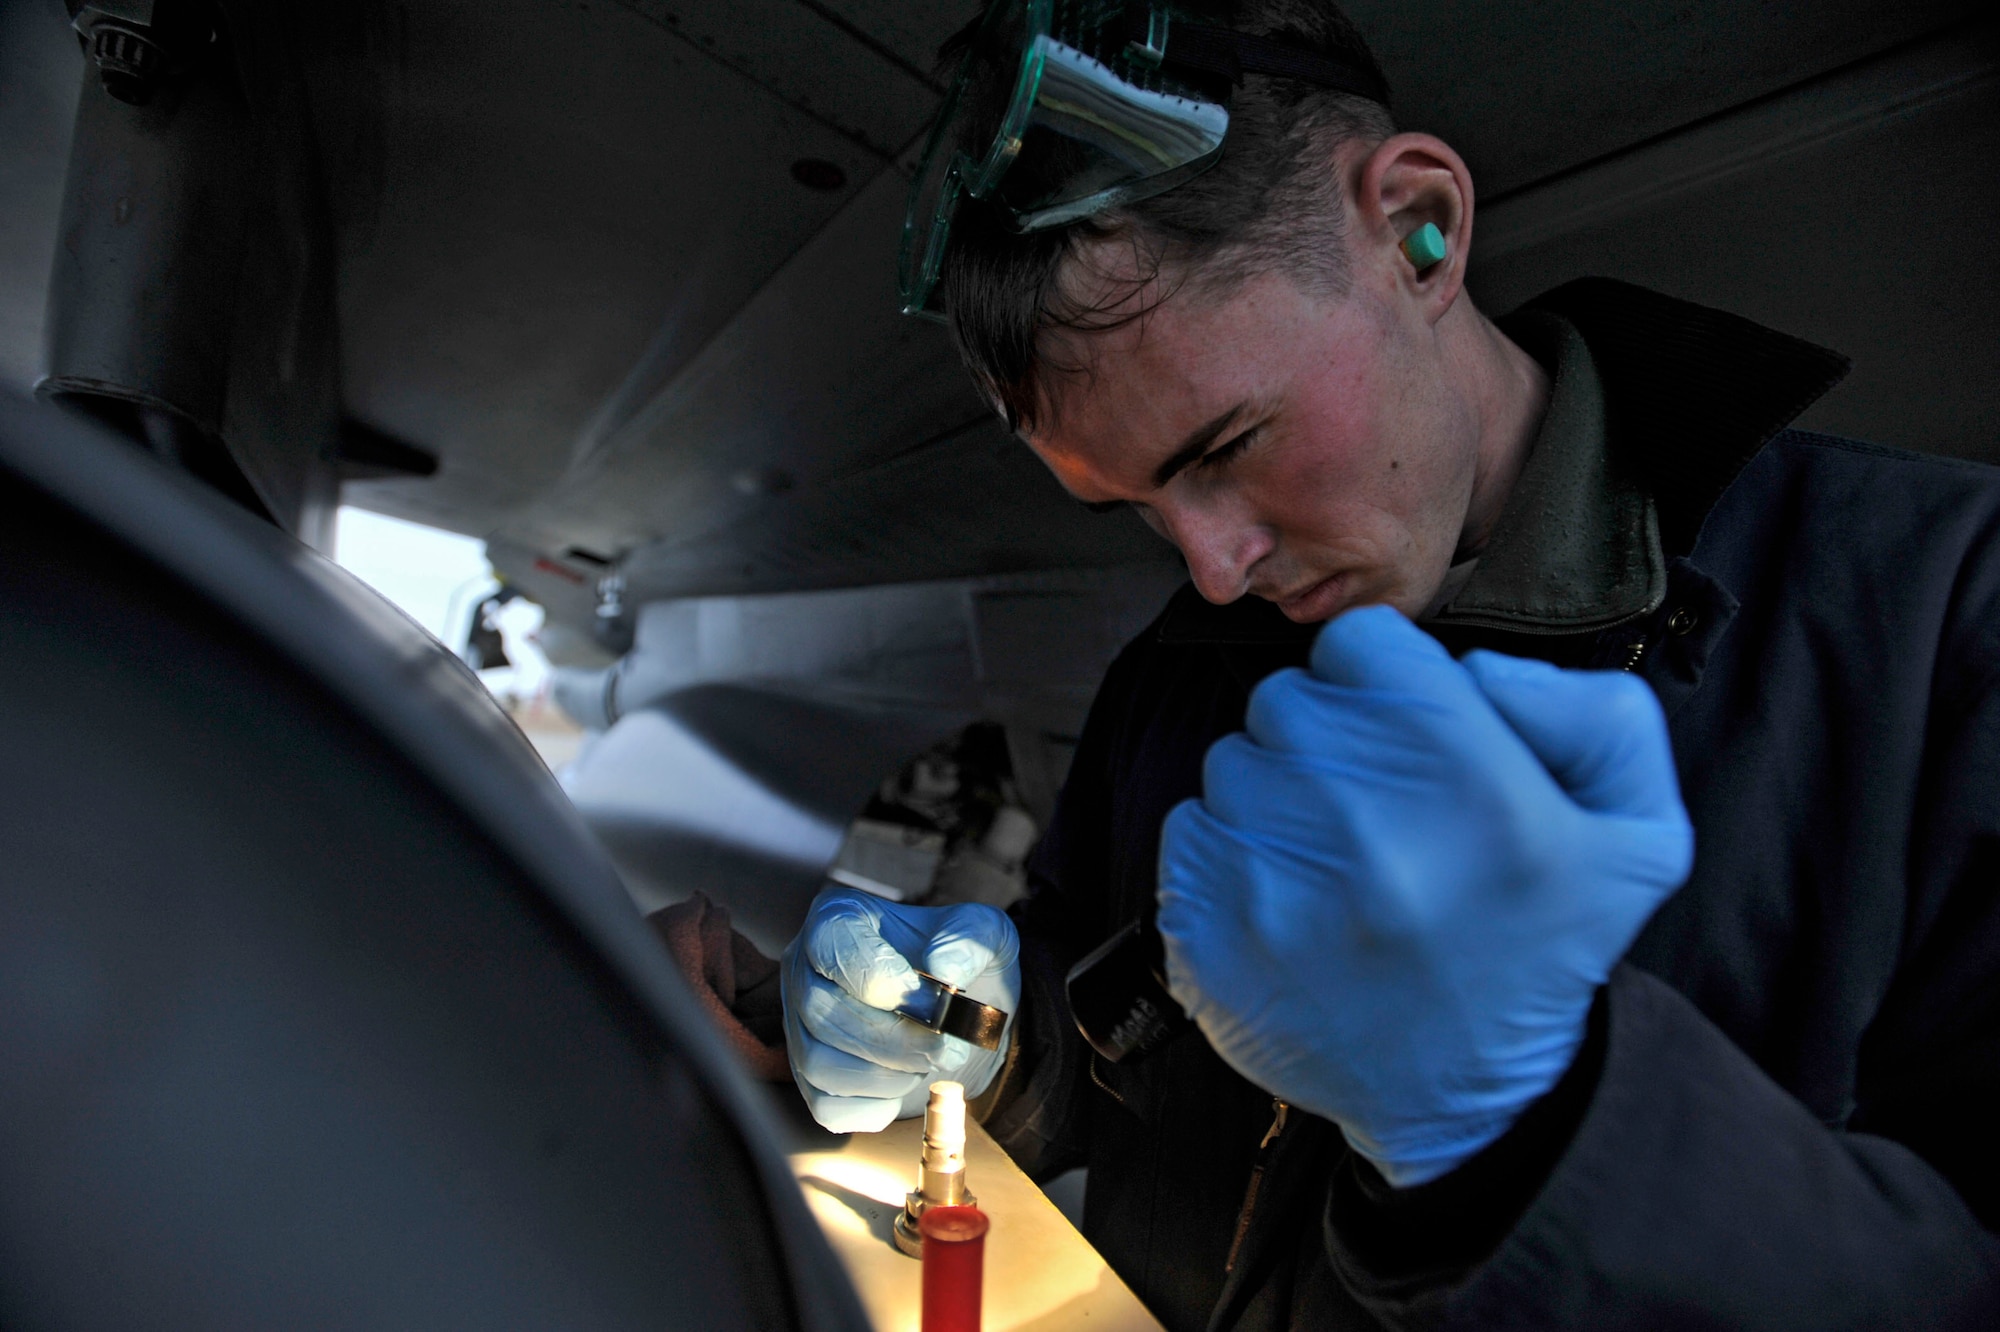 MISAWA AIR BASE, Japan – U.S. Air Force Staff Sgt. Thomas Larson, 14th Aircraft Maintenance Unit crew chief, illuminates a magnetic chip detector while inspecting his assigned F-16 Fighting Falcon at Misawa Air Base, Japan, Dec. 10, 2013. The MCD detects traces of metal particles in the oil system of the aircraft, which helps Larson to determine if the jet is performing at its peak capability. (U.S. Air Force photo by Staff Sgt. Tong Duong)